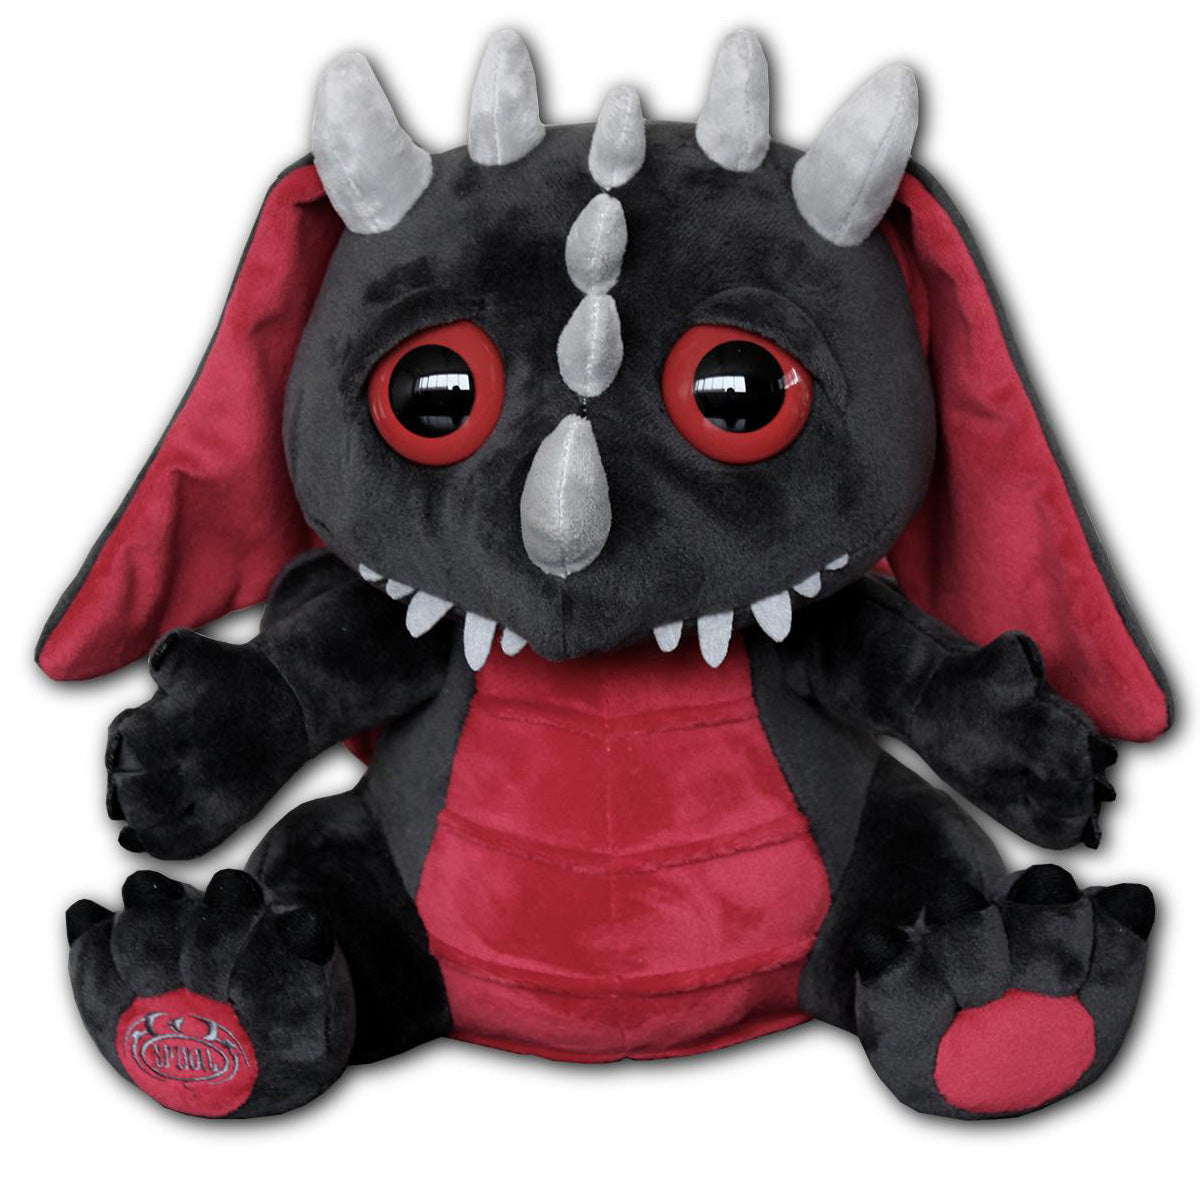 Gothic and Fantasy Plush. Including 